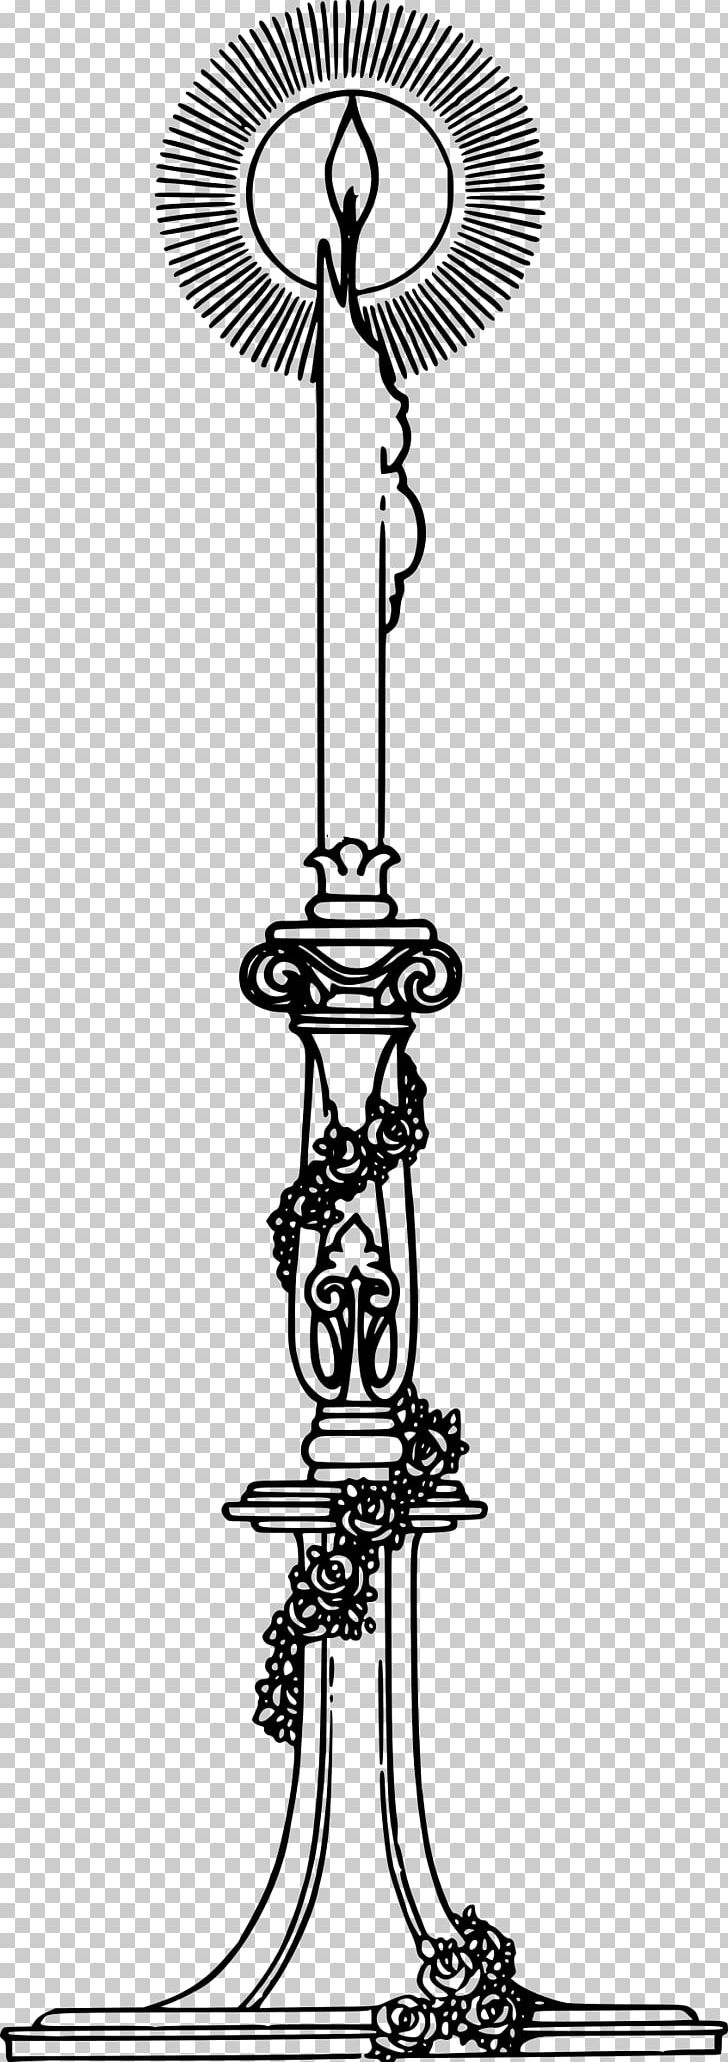 Tree Line Art Candlestick PNG, Clipart, Art, Black And White, Candle, Candle Holder, Candlestick Free PNG Download